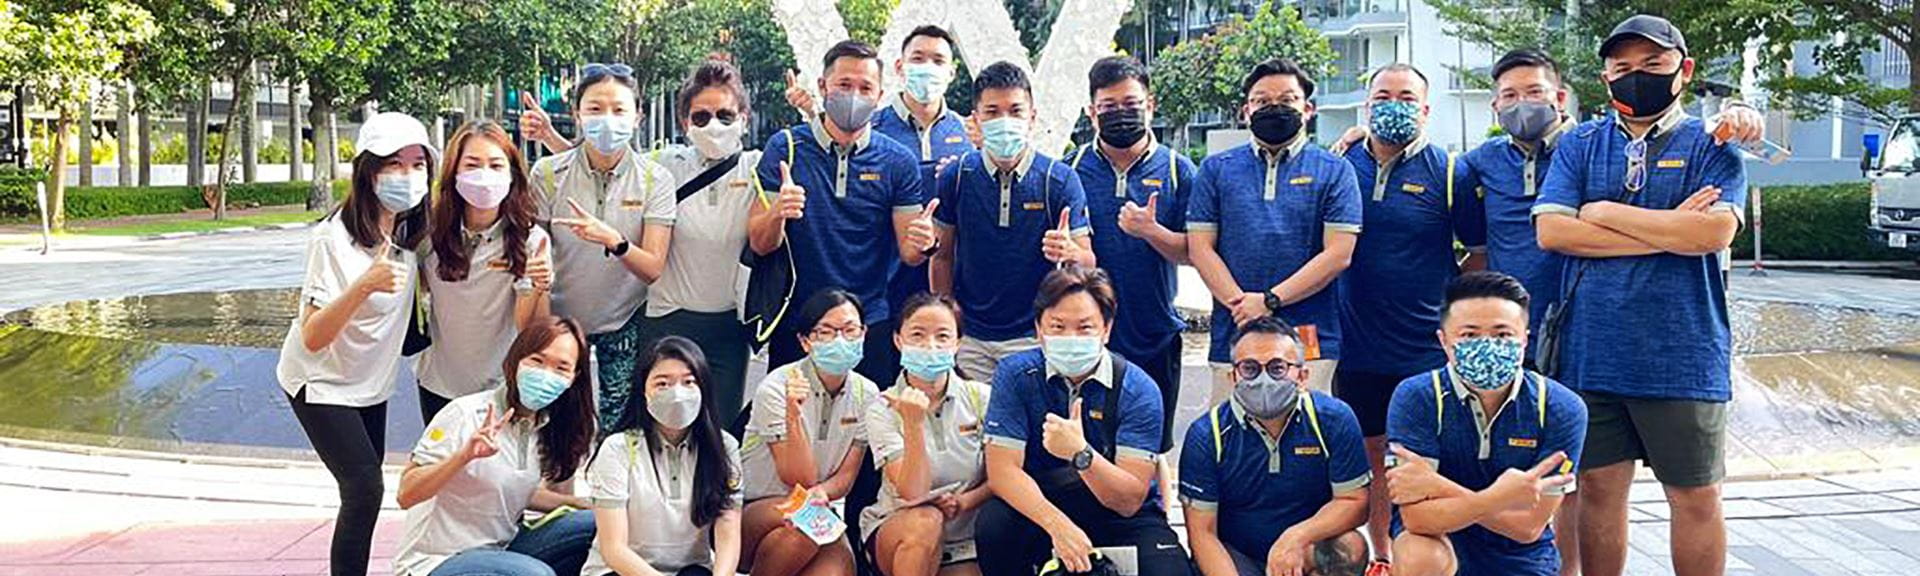 Sentosa MICE The Great Post-Pandemic Reconnection